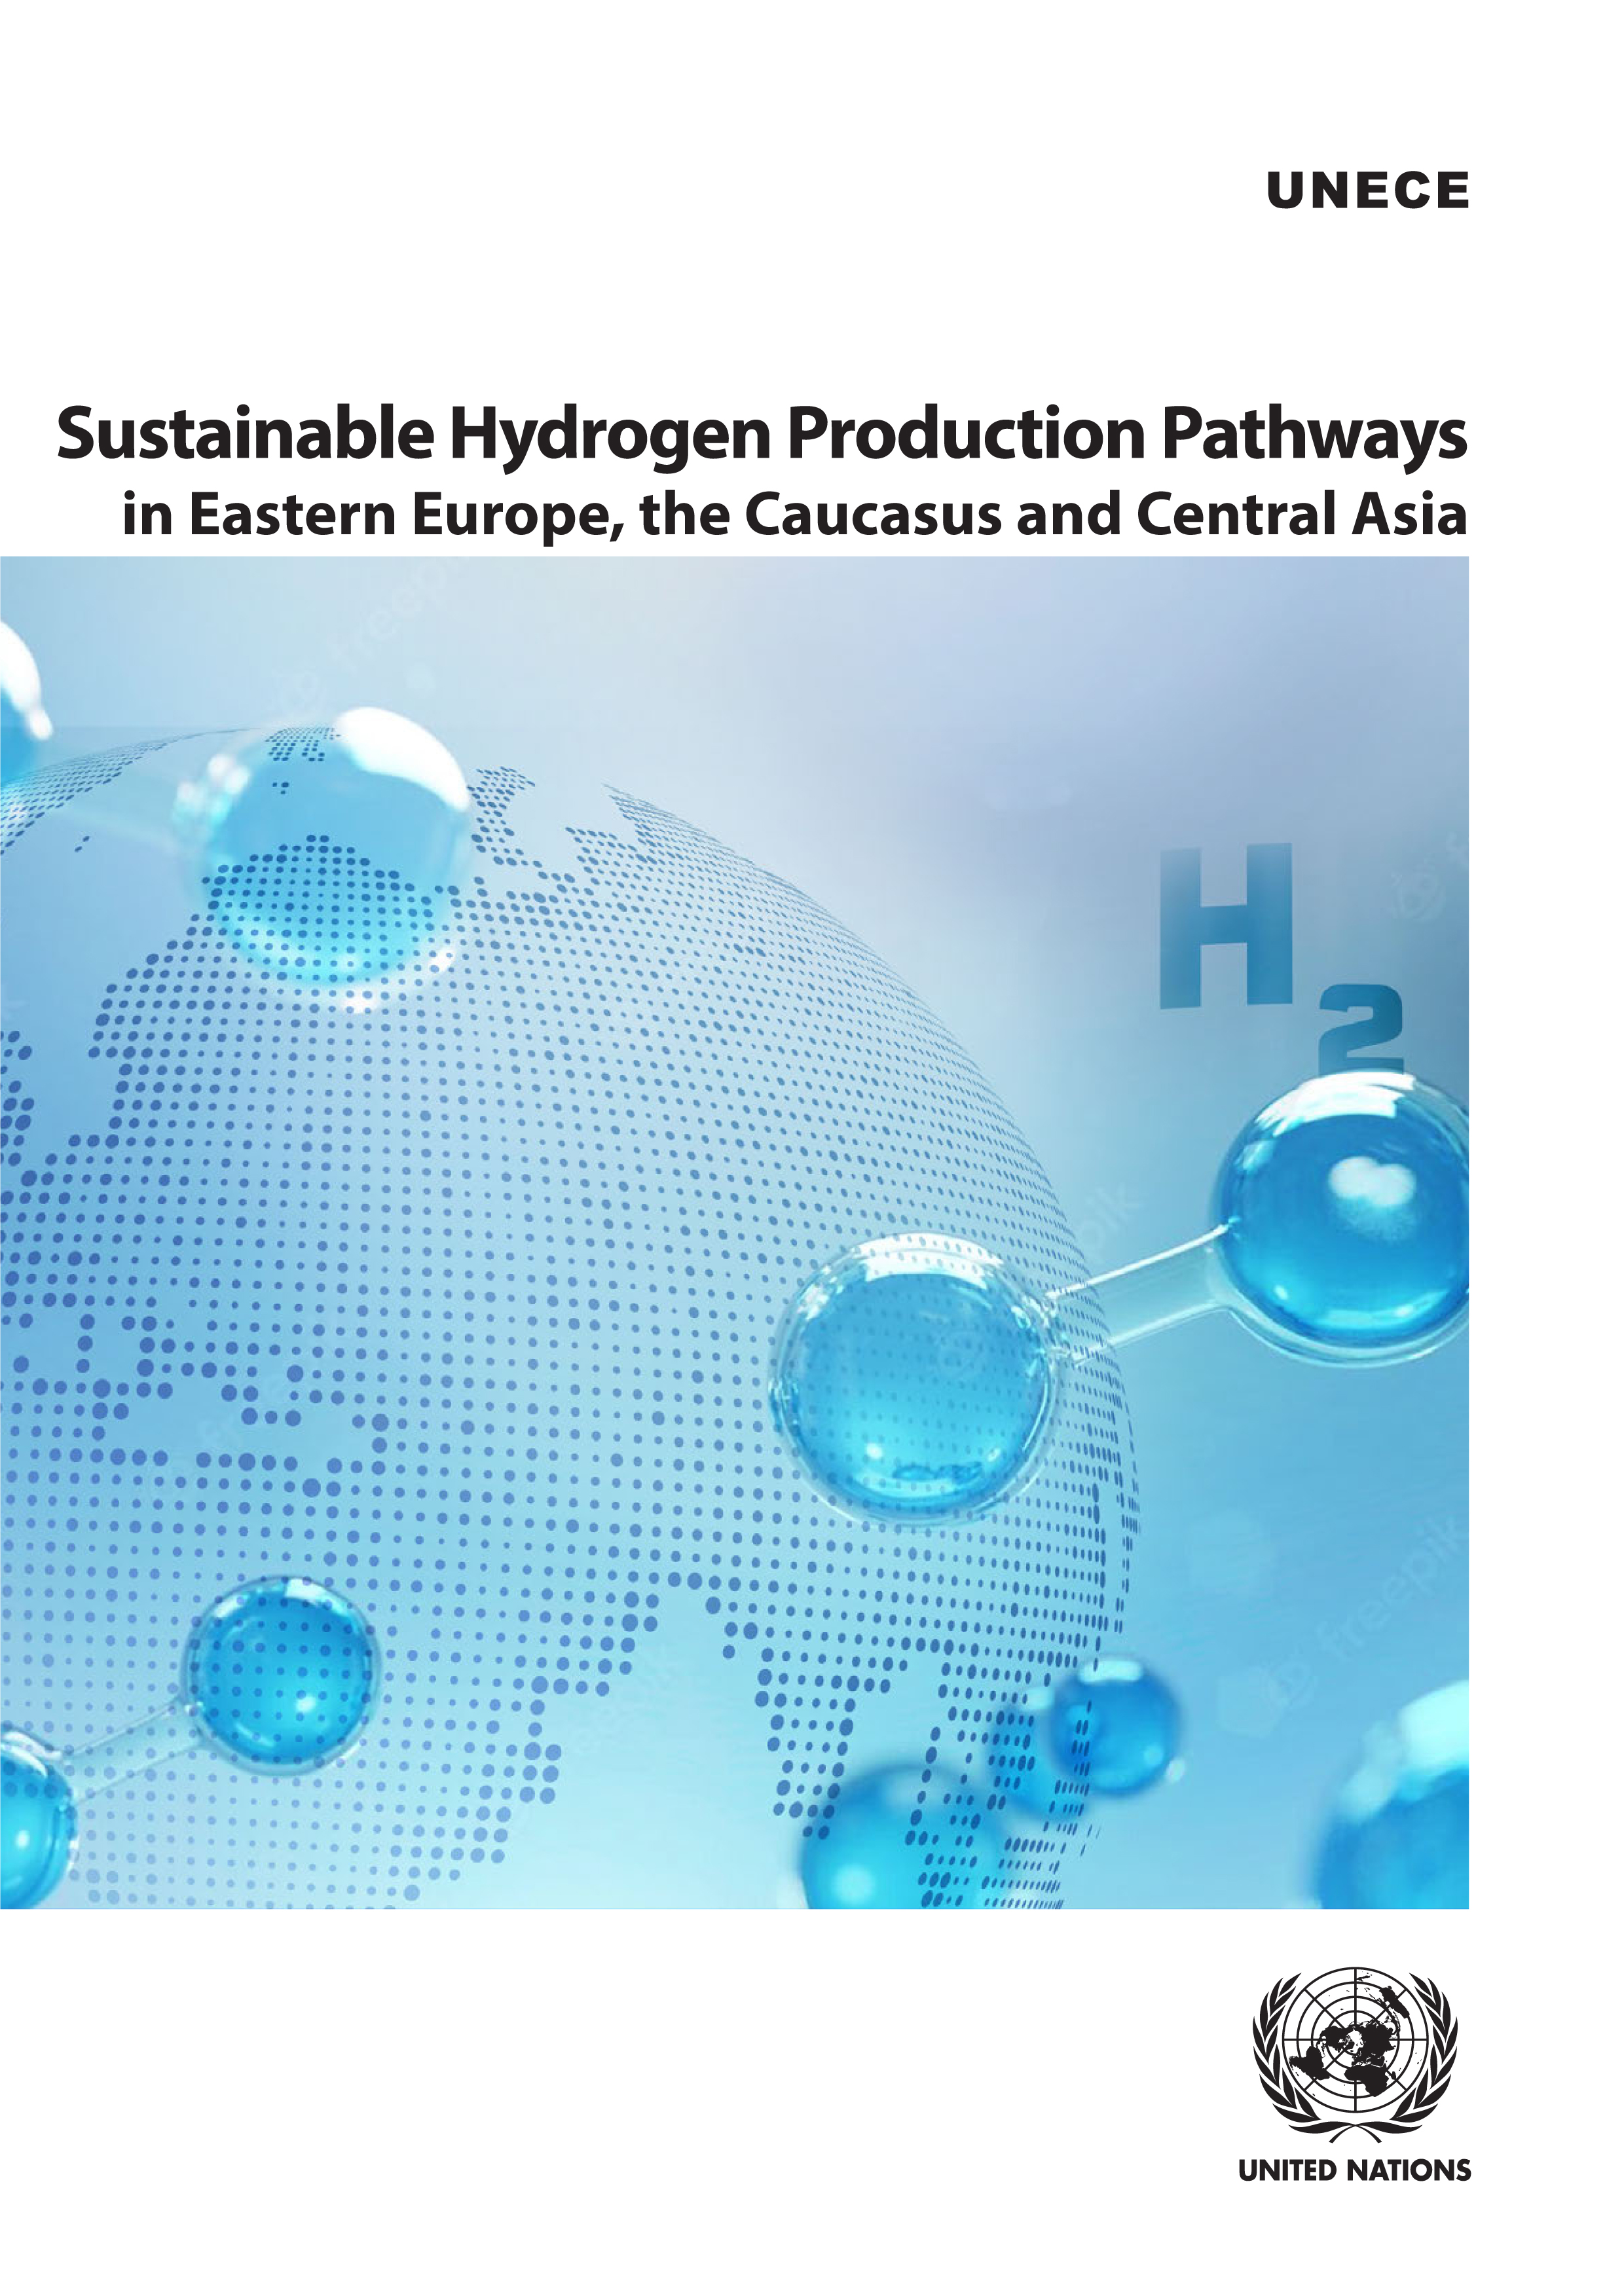 image of Sustainable Hydrogen Production Pathways in Eastern Europe, the Caucasus and Central Asia